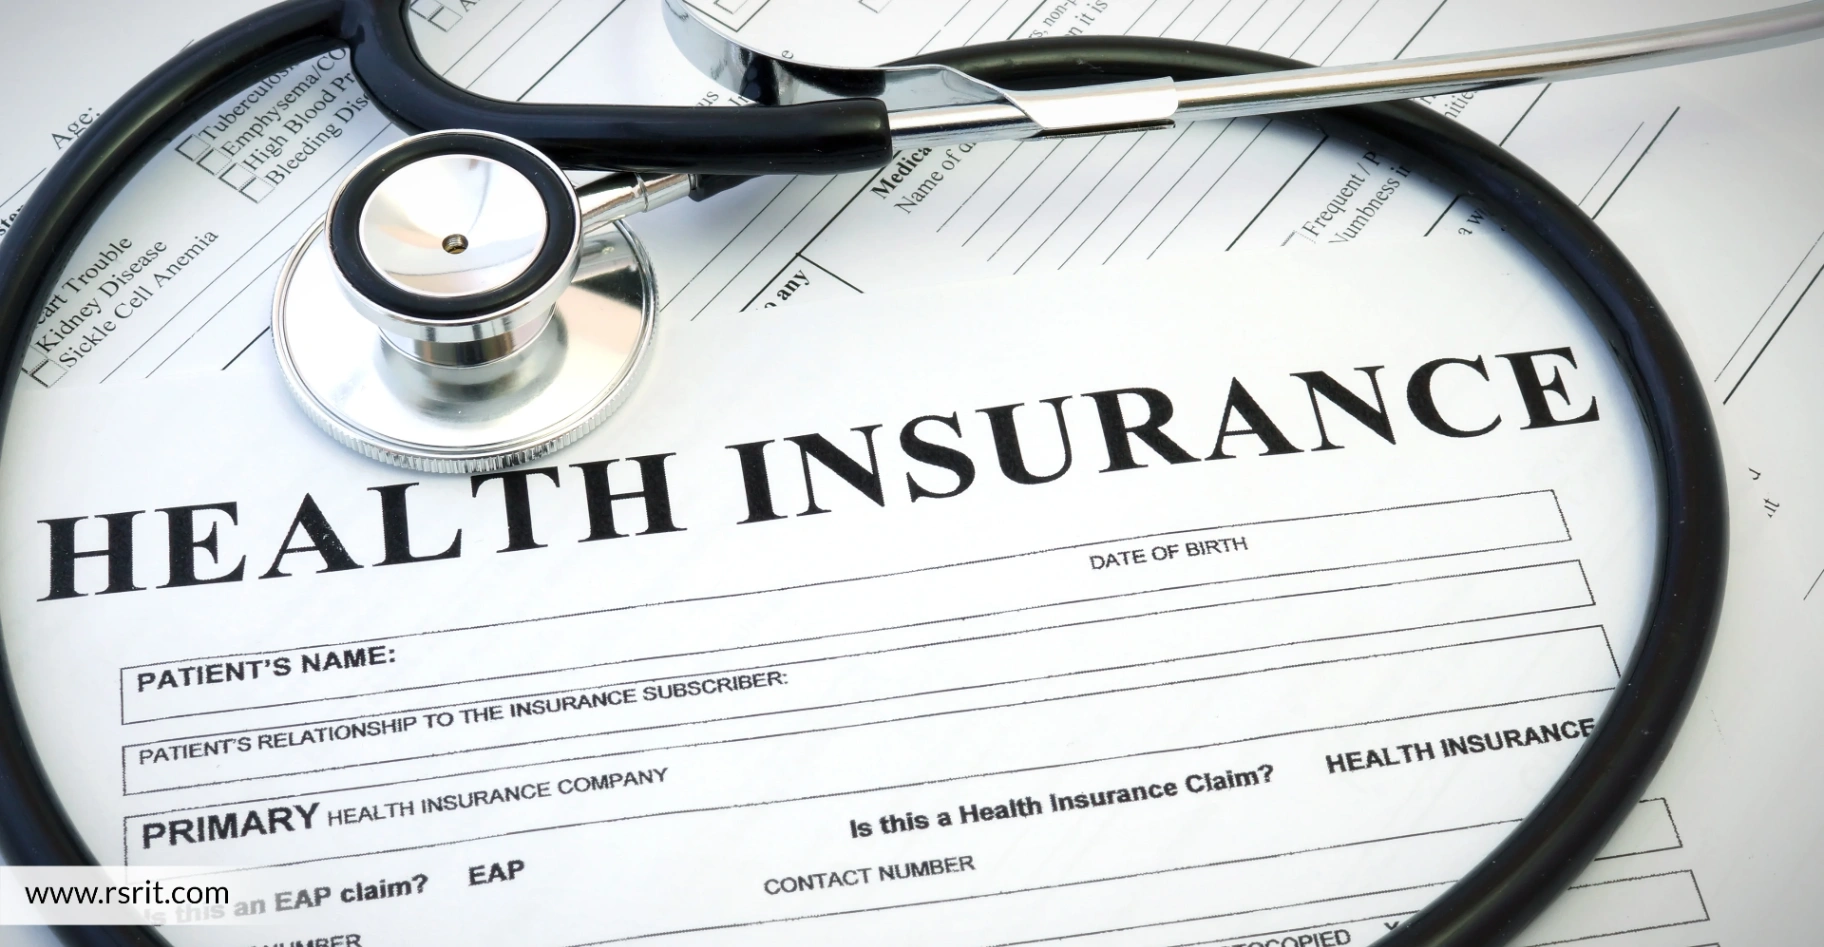 Strategies for Selecting the Best Health Insurance Companies